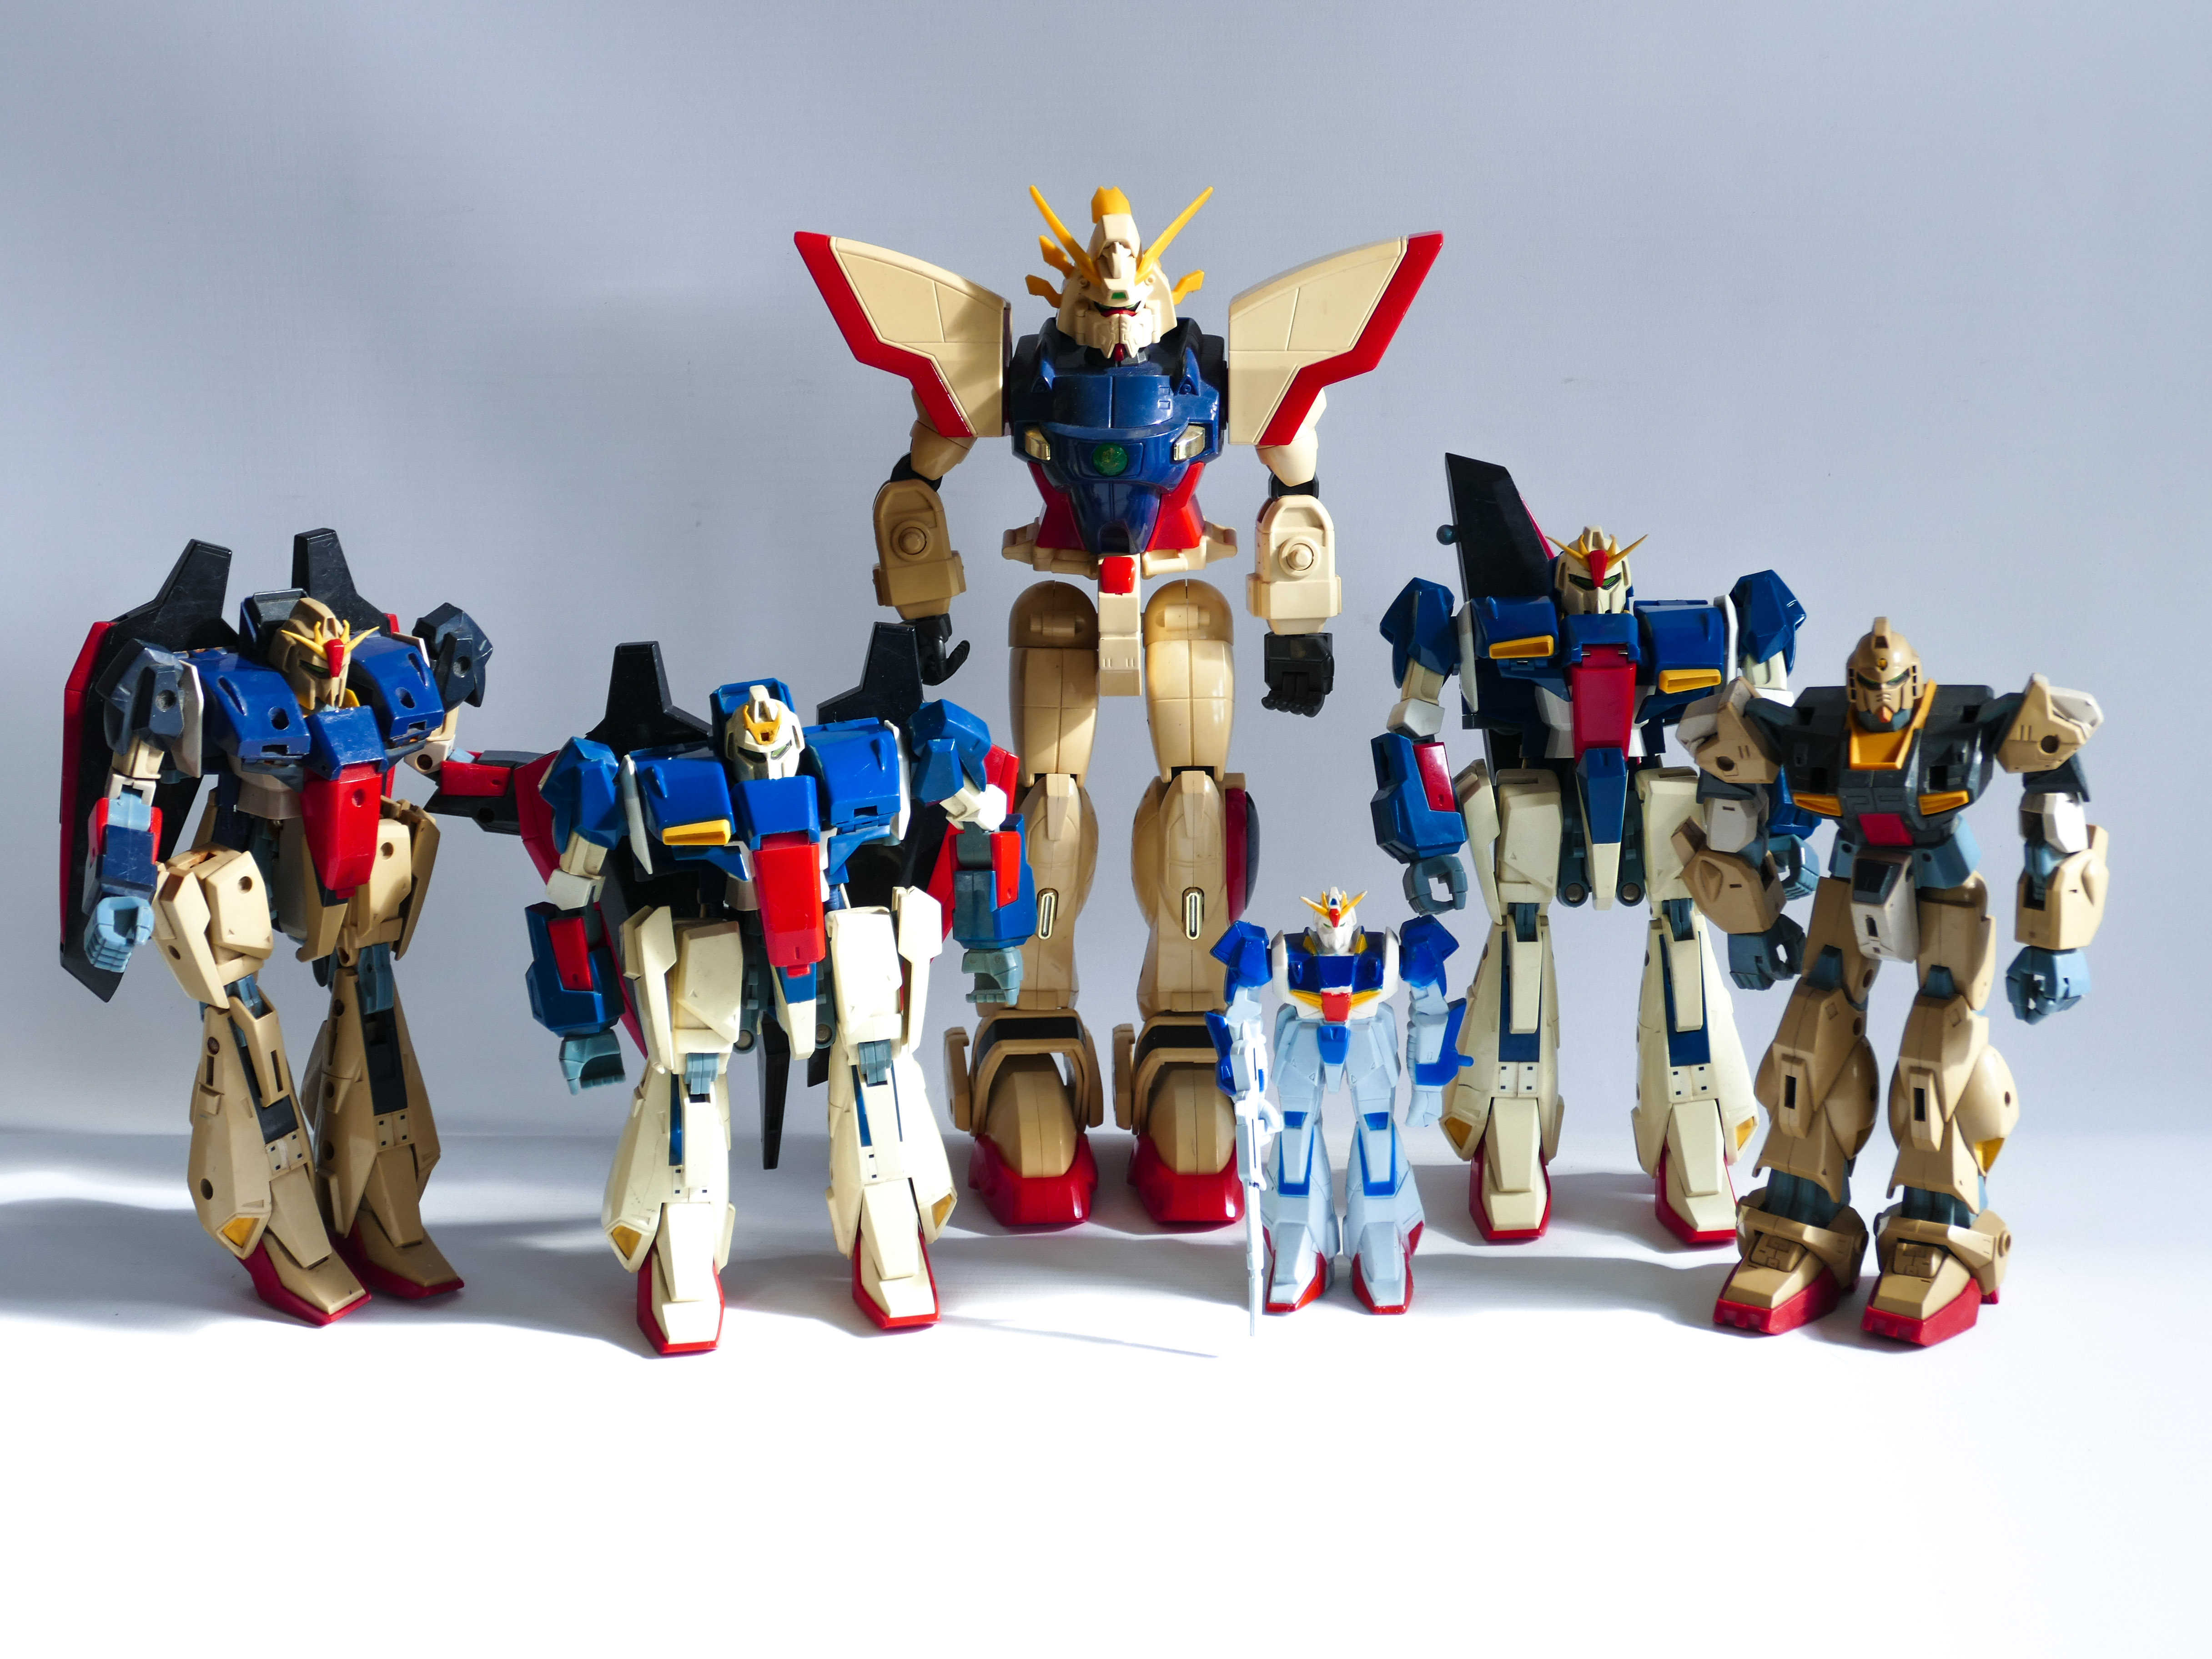 This is a lot of articulated GUNDAM toy robots made in JAPAN by BANDAI in  the 1980's. Played with